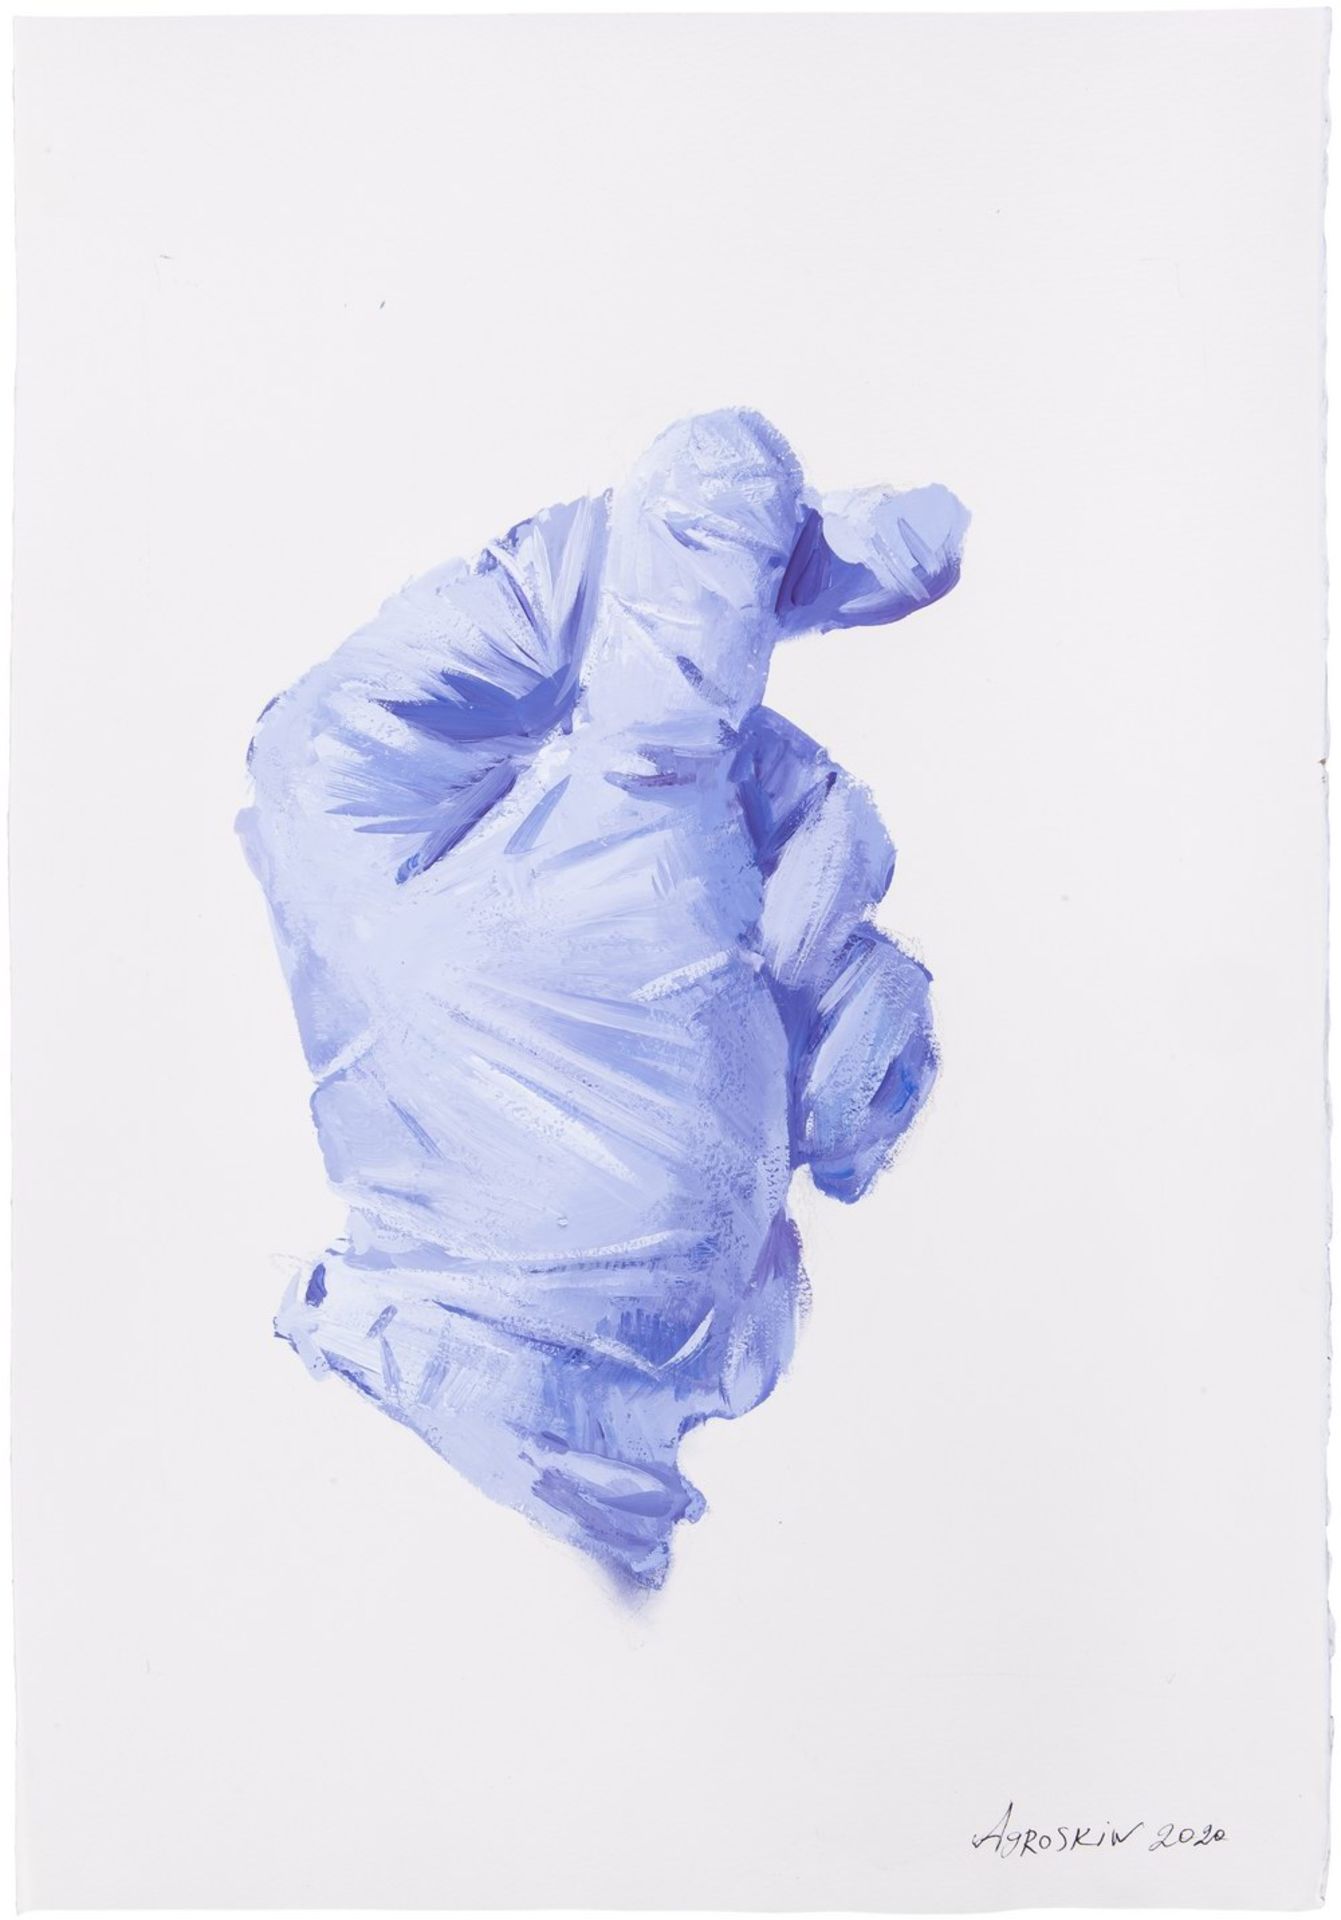 Agroskin, S.E. A glove. 2020. Paper, mixed media. 56x38 cm. <br>Signed. Sales: Lyon &amp; Turnbull (